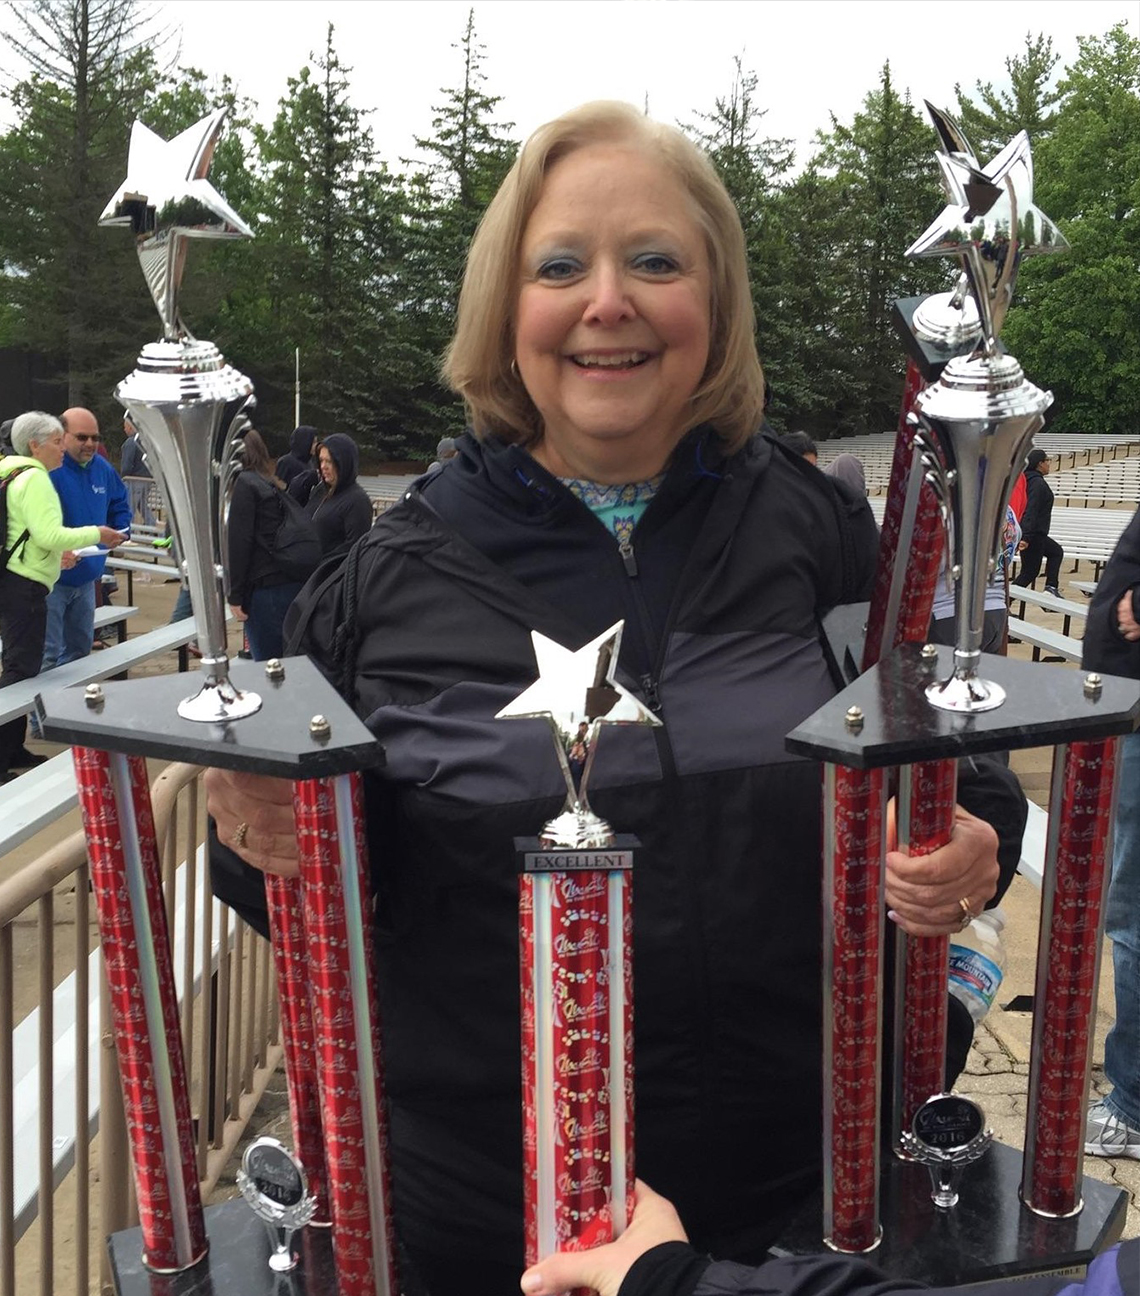 Teri Aitchison - The keeper of the Music in the Parks awards.